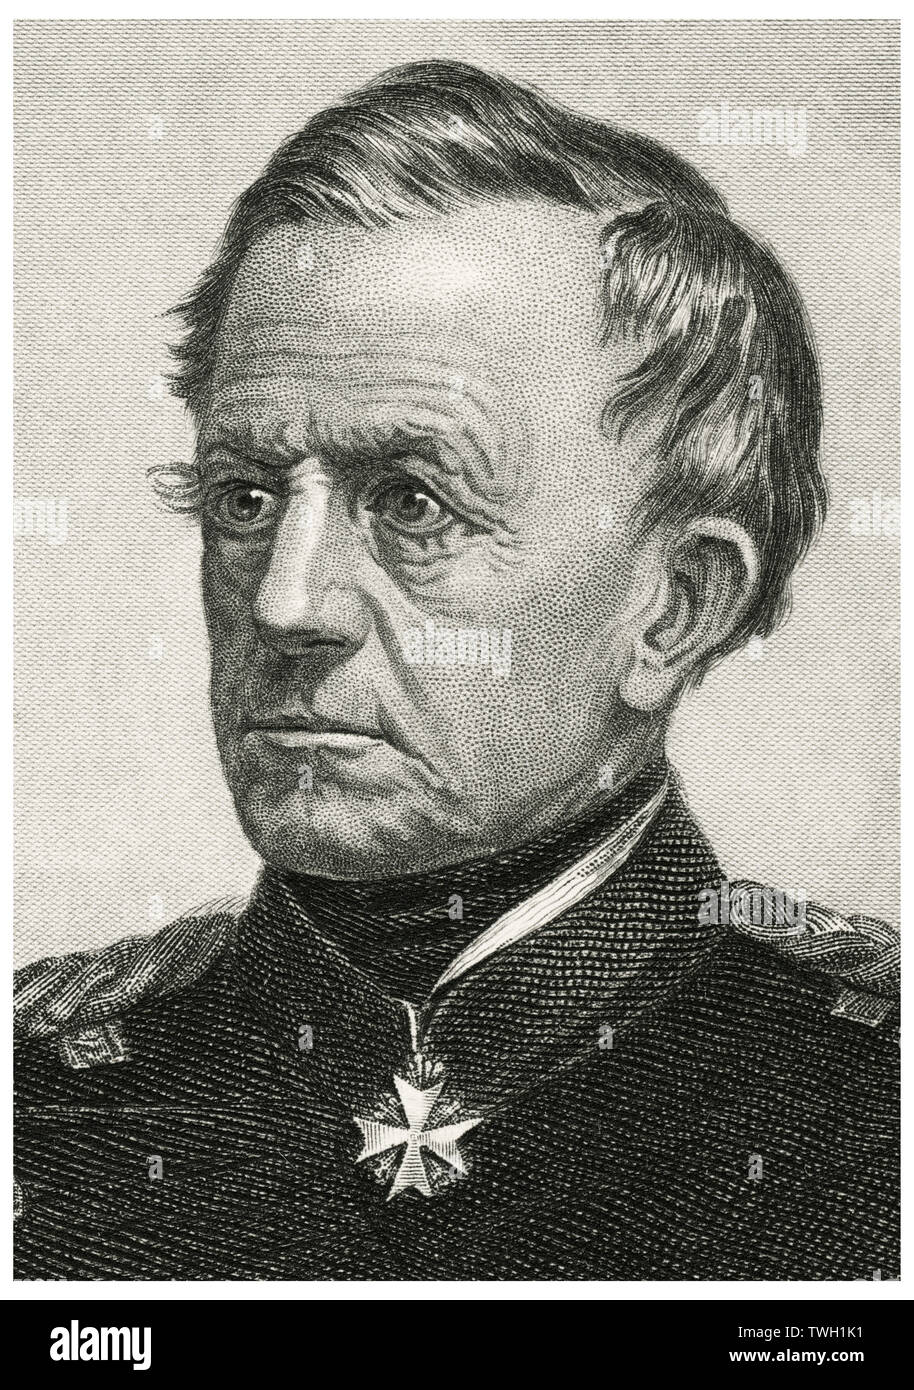 Helmuth von Moltke (1800-91), the Elder, Prussian Field Marshal and Chief of the German General Staff, Head and Shoulders Portrait, Steel Engraving, Portrait Gallery of Eminent Men and Women of Europe and America by Evert A. Duyckinck, Published by Henry J. Johnson, Johnson, Wilson & Company, New York, 1873 Stock Photo